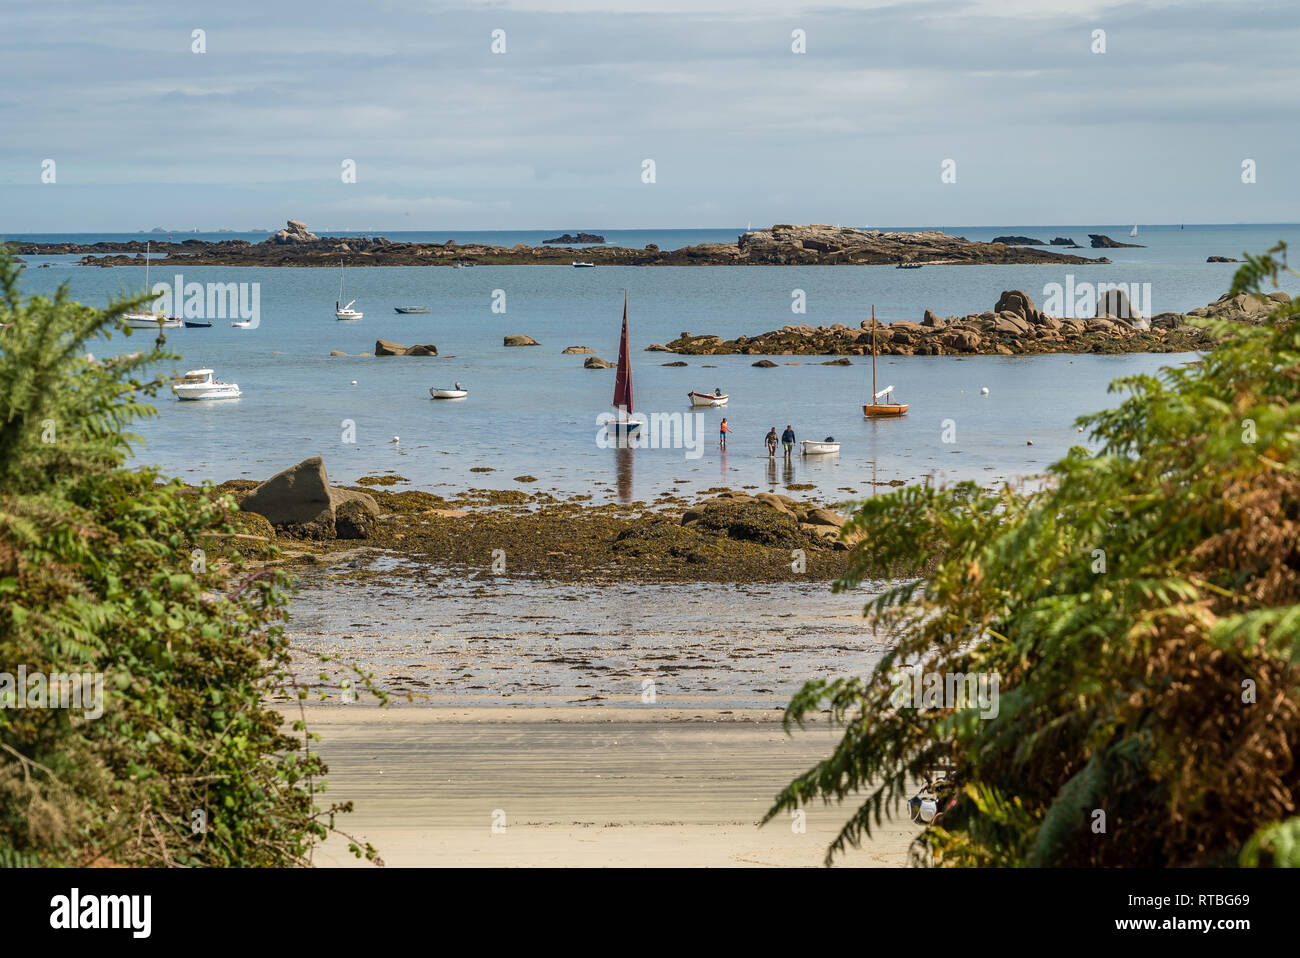 Sailing boats on the ocean in Callot island in brittany Stock Photo